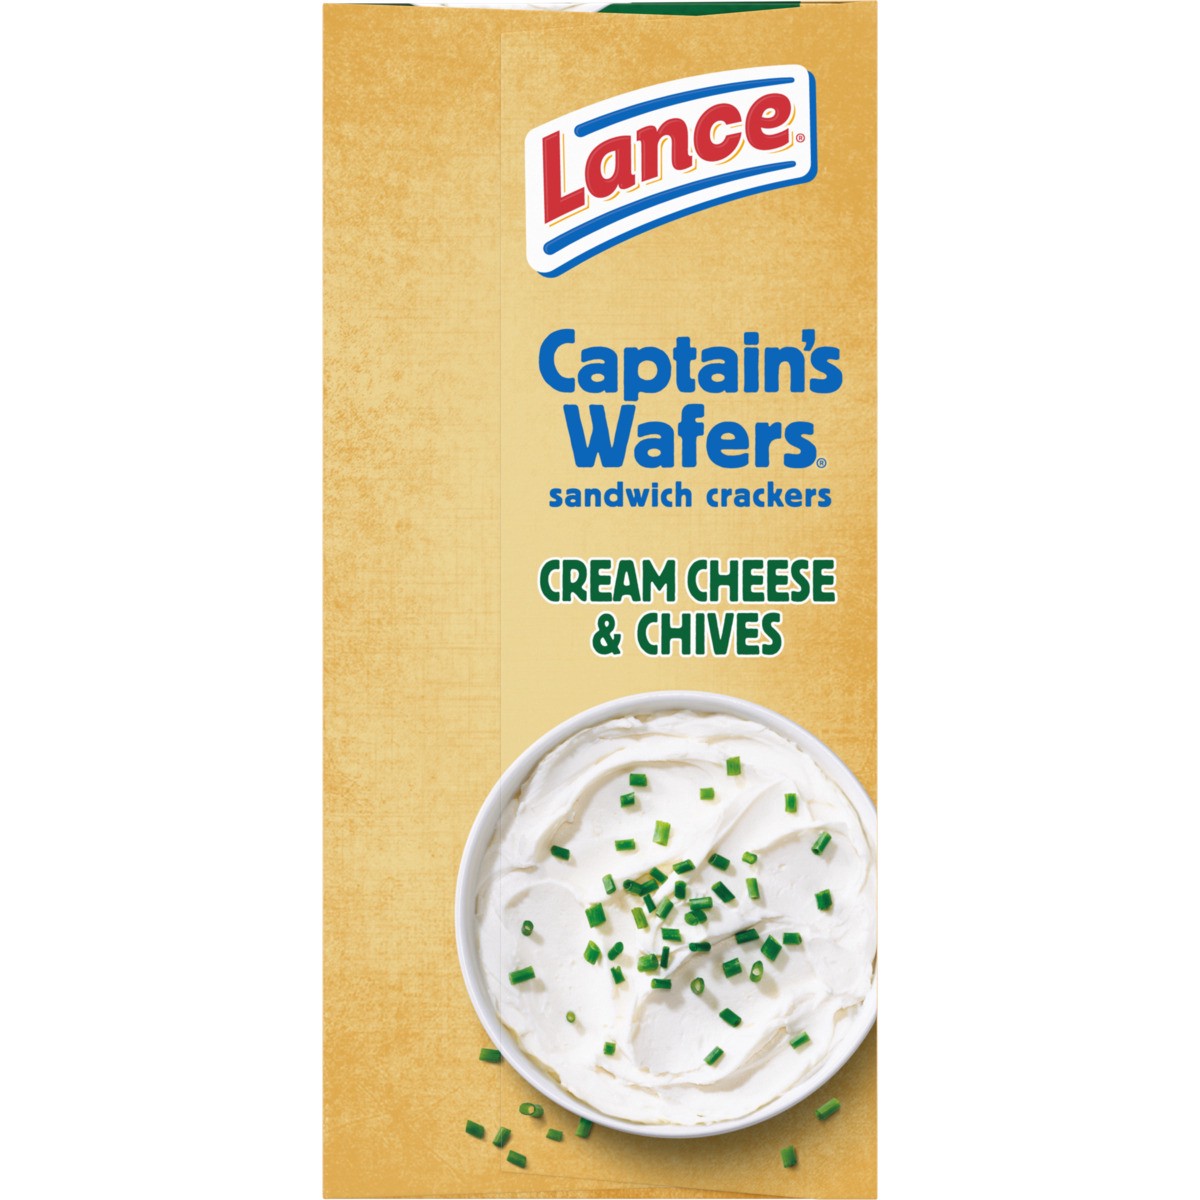 slide 11 of 11, Lance Sandwich Crackers, Captain's Wafers Cream Cheese and Chives, 6 Packs, 4 Sandwiches Each, 5.5 oz